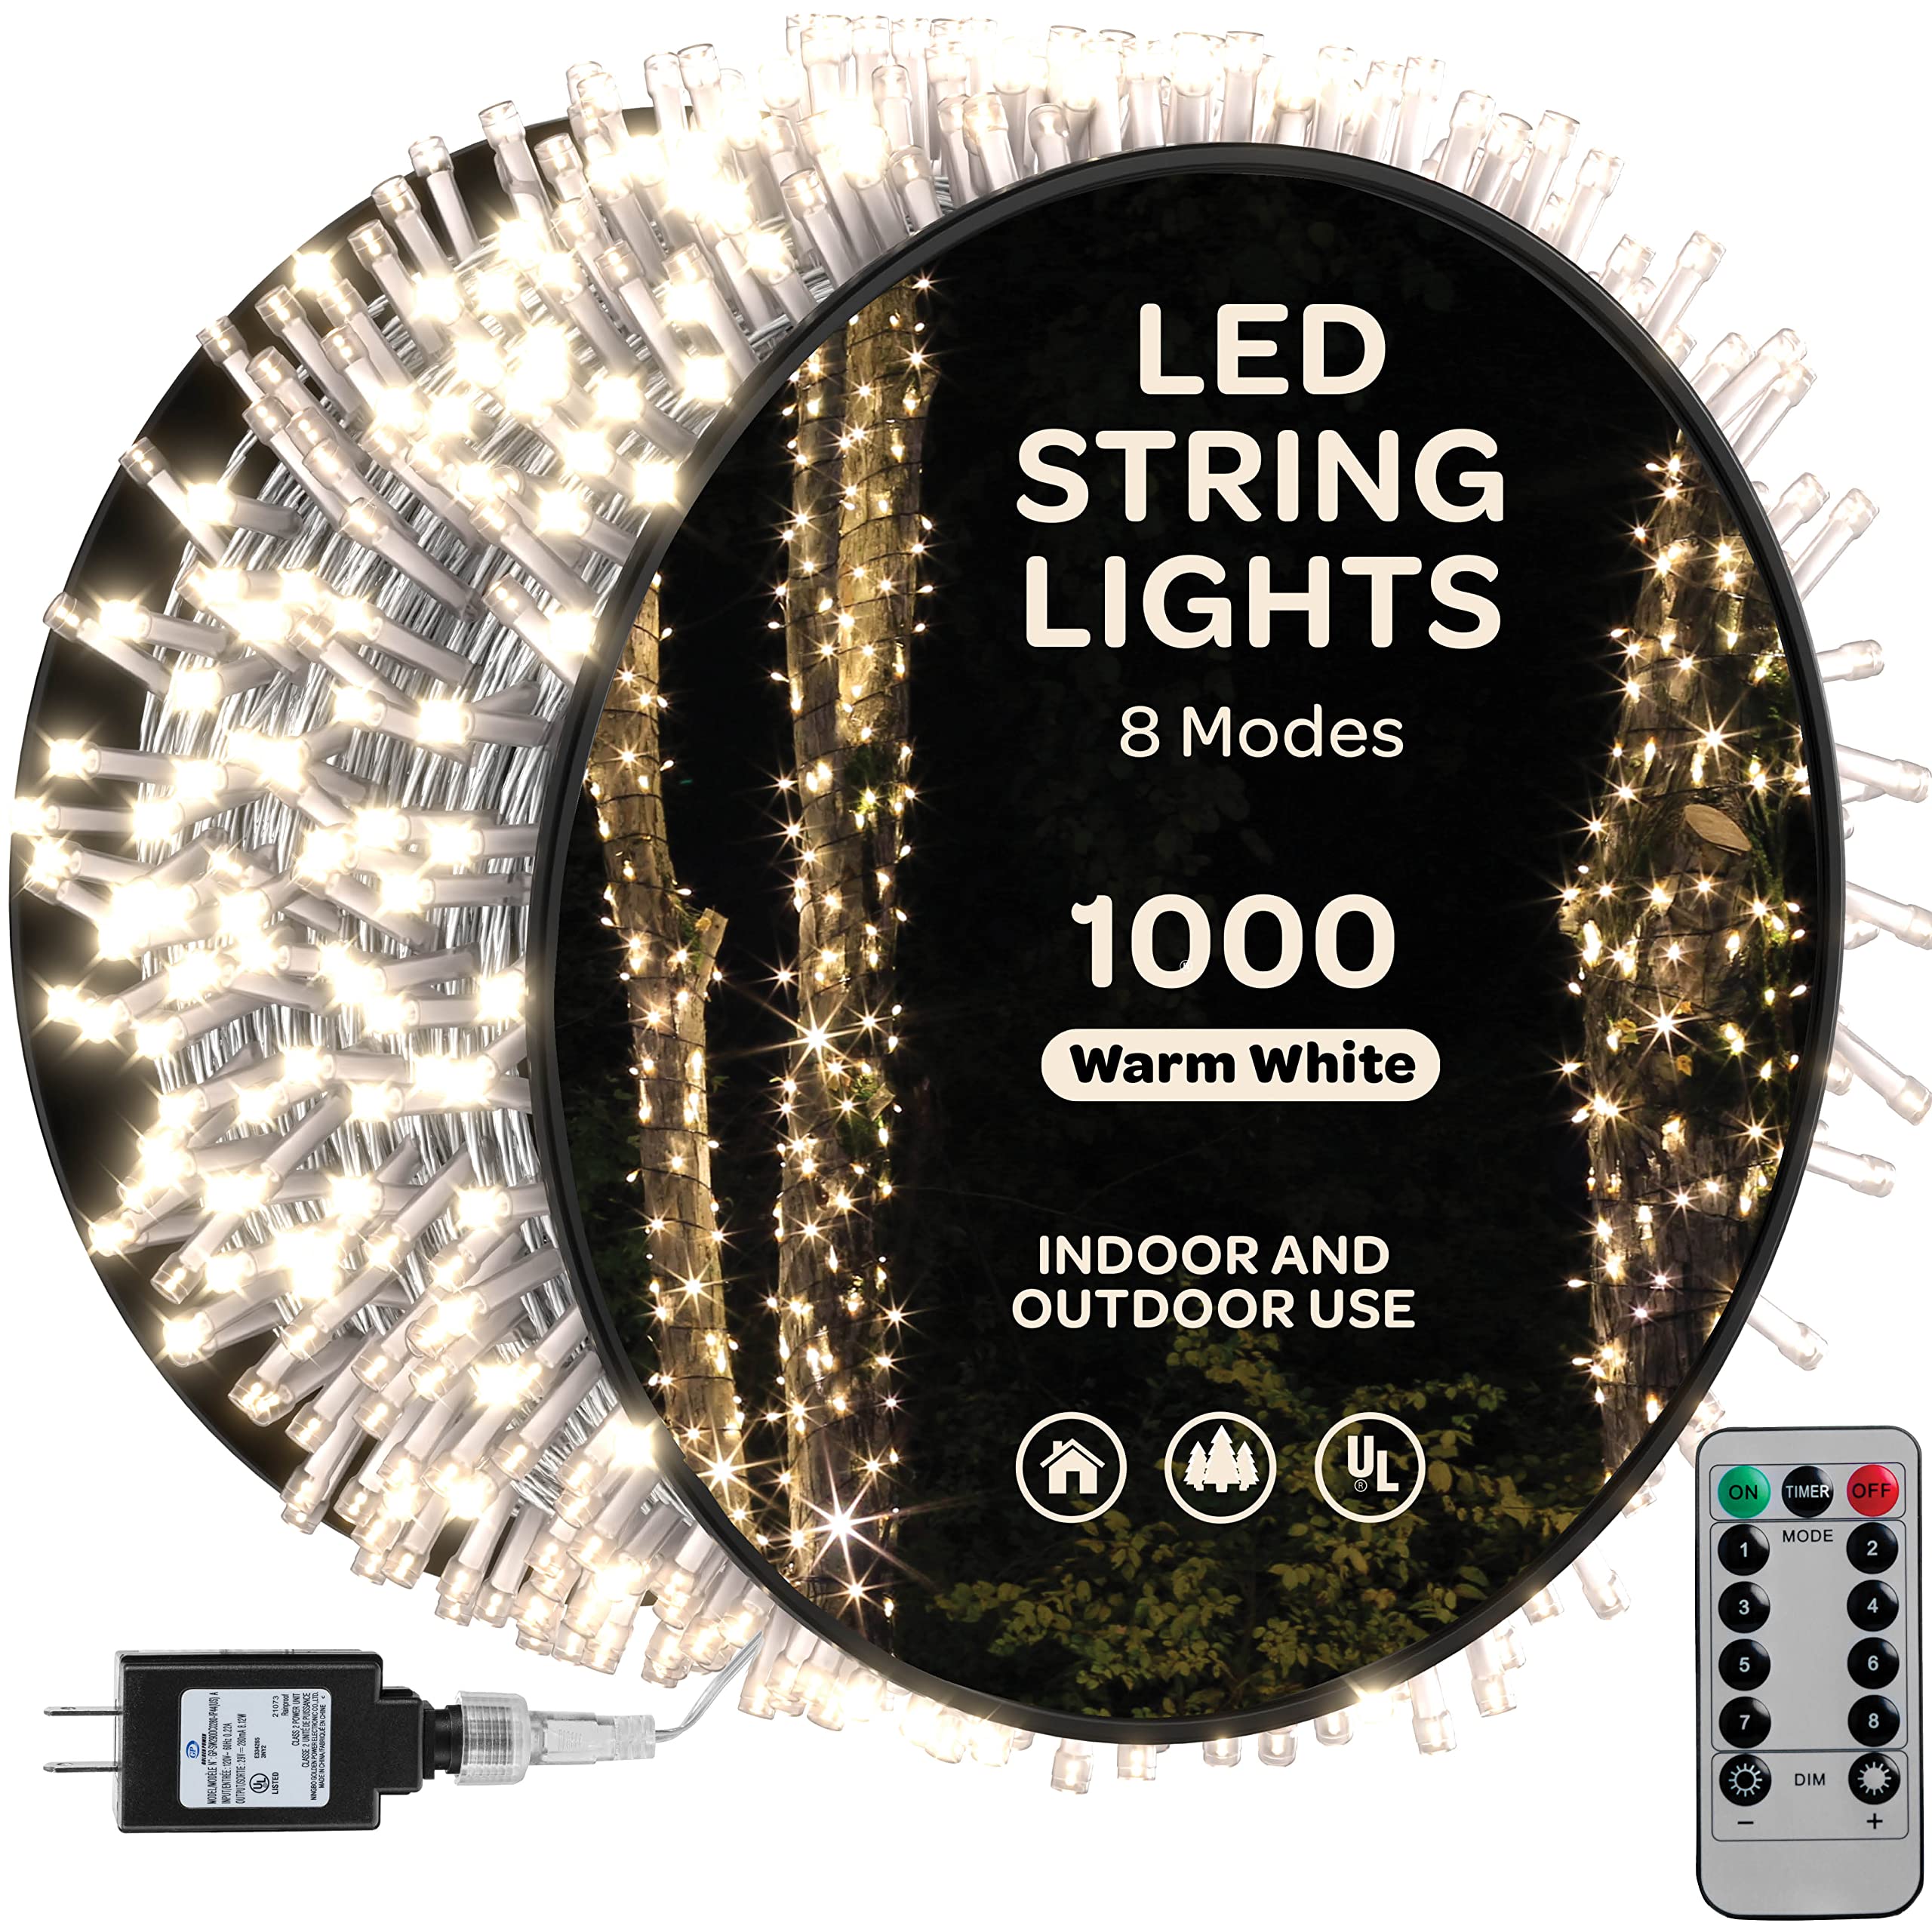 1000 LED Christmas Lights [Warm White] 400ft Super Long String Lights - Remote with 8 Modes/Timer/dimmable - UL Approved for Indoor/Outdoor Use - for Holiday/Christmas/Party/Decorations (Clear Wire)  - Very Good